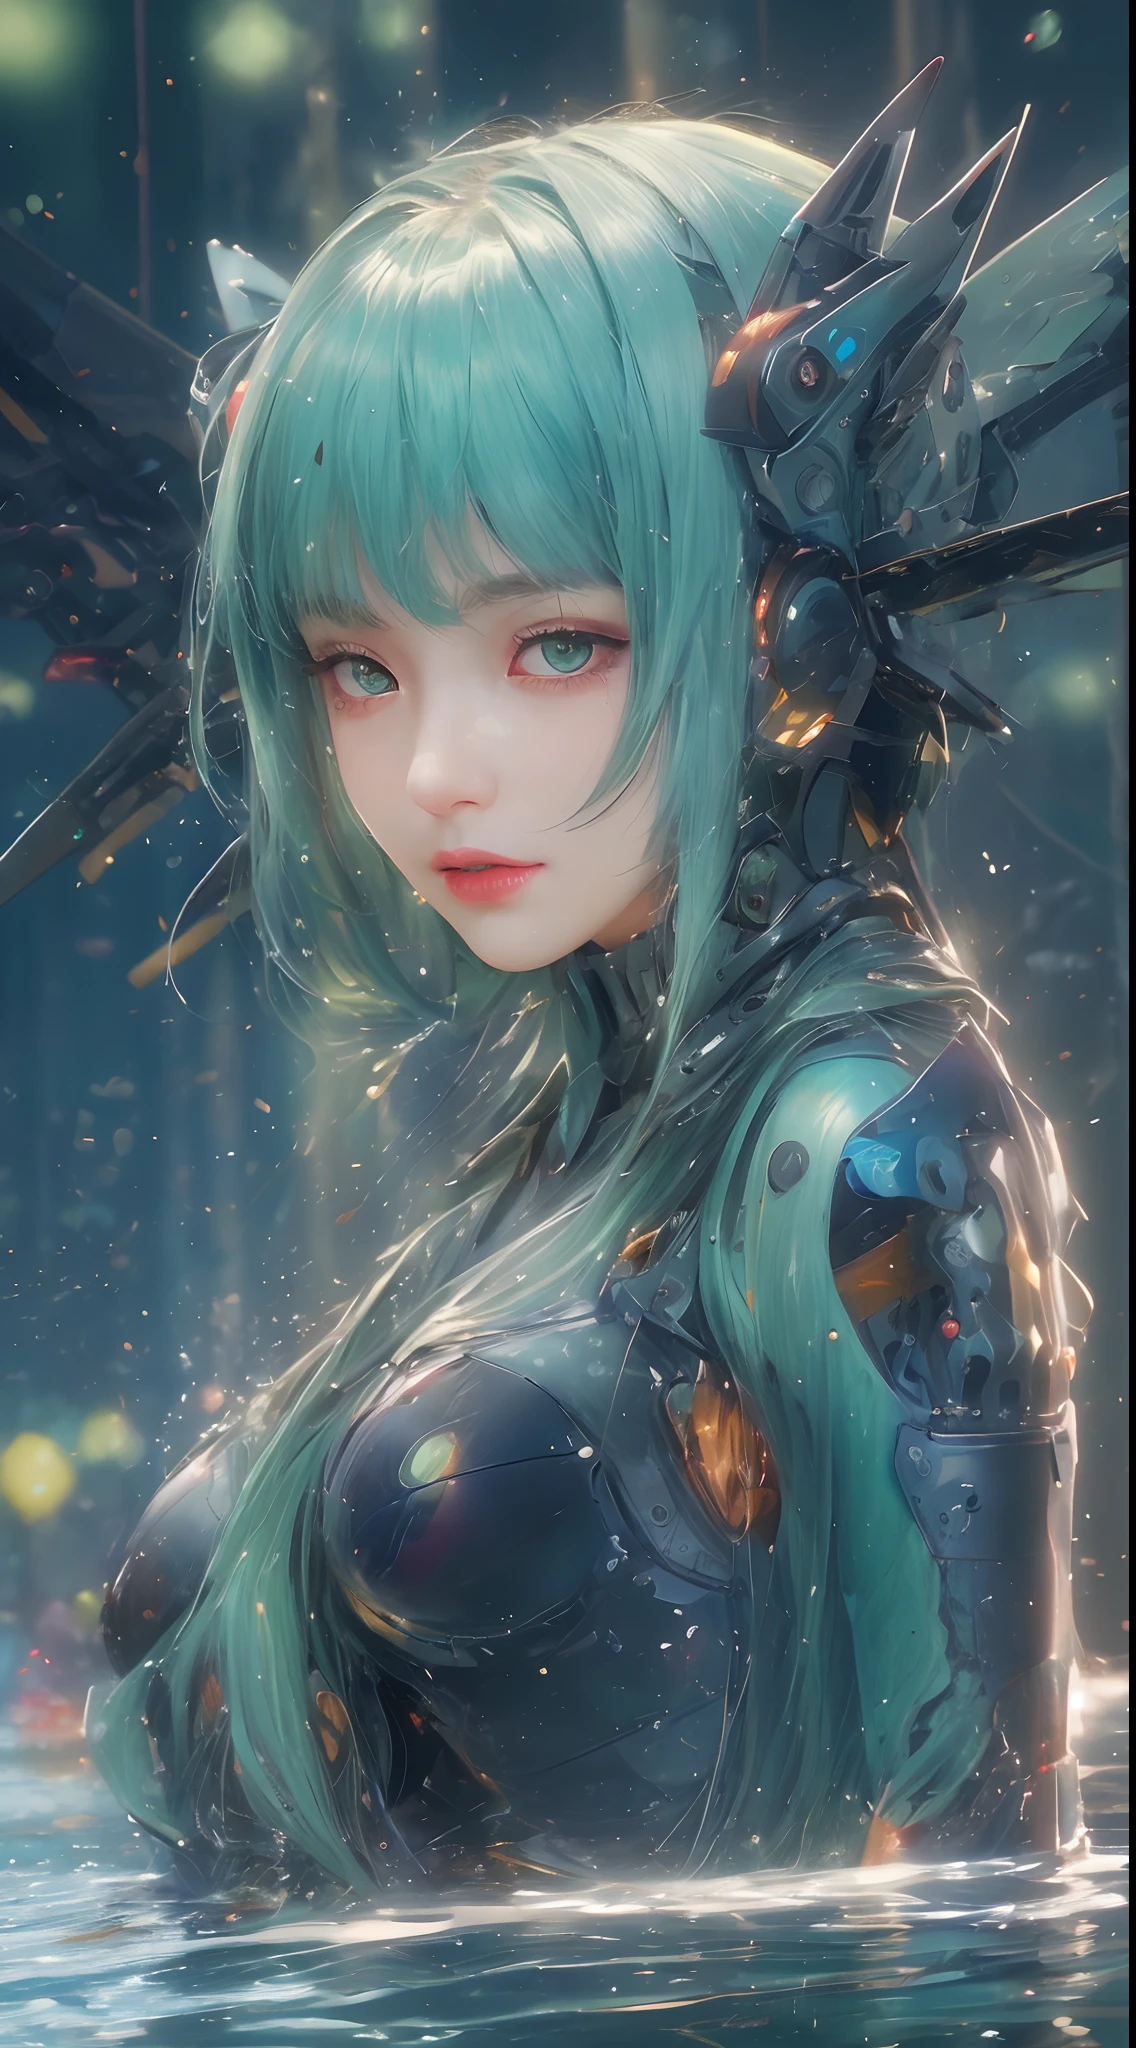 (A complex green-haired woman，Mecha joints and wing radiation, Quiet and dignified, Standing in the water), High-res, Ultra-detailed, Realistic, Vibrant colors, Bokeh, Studio lighting.